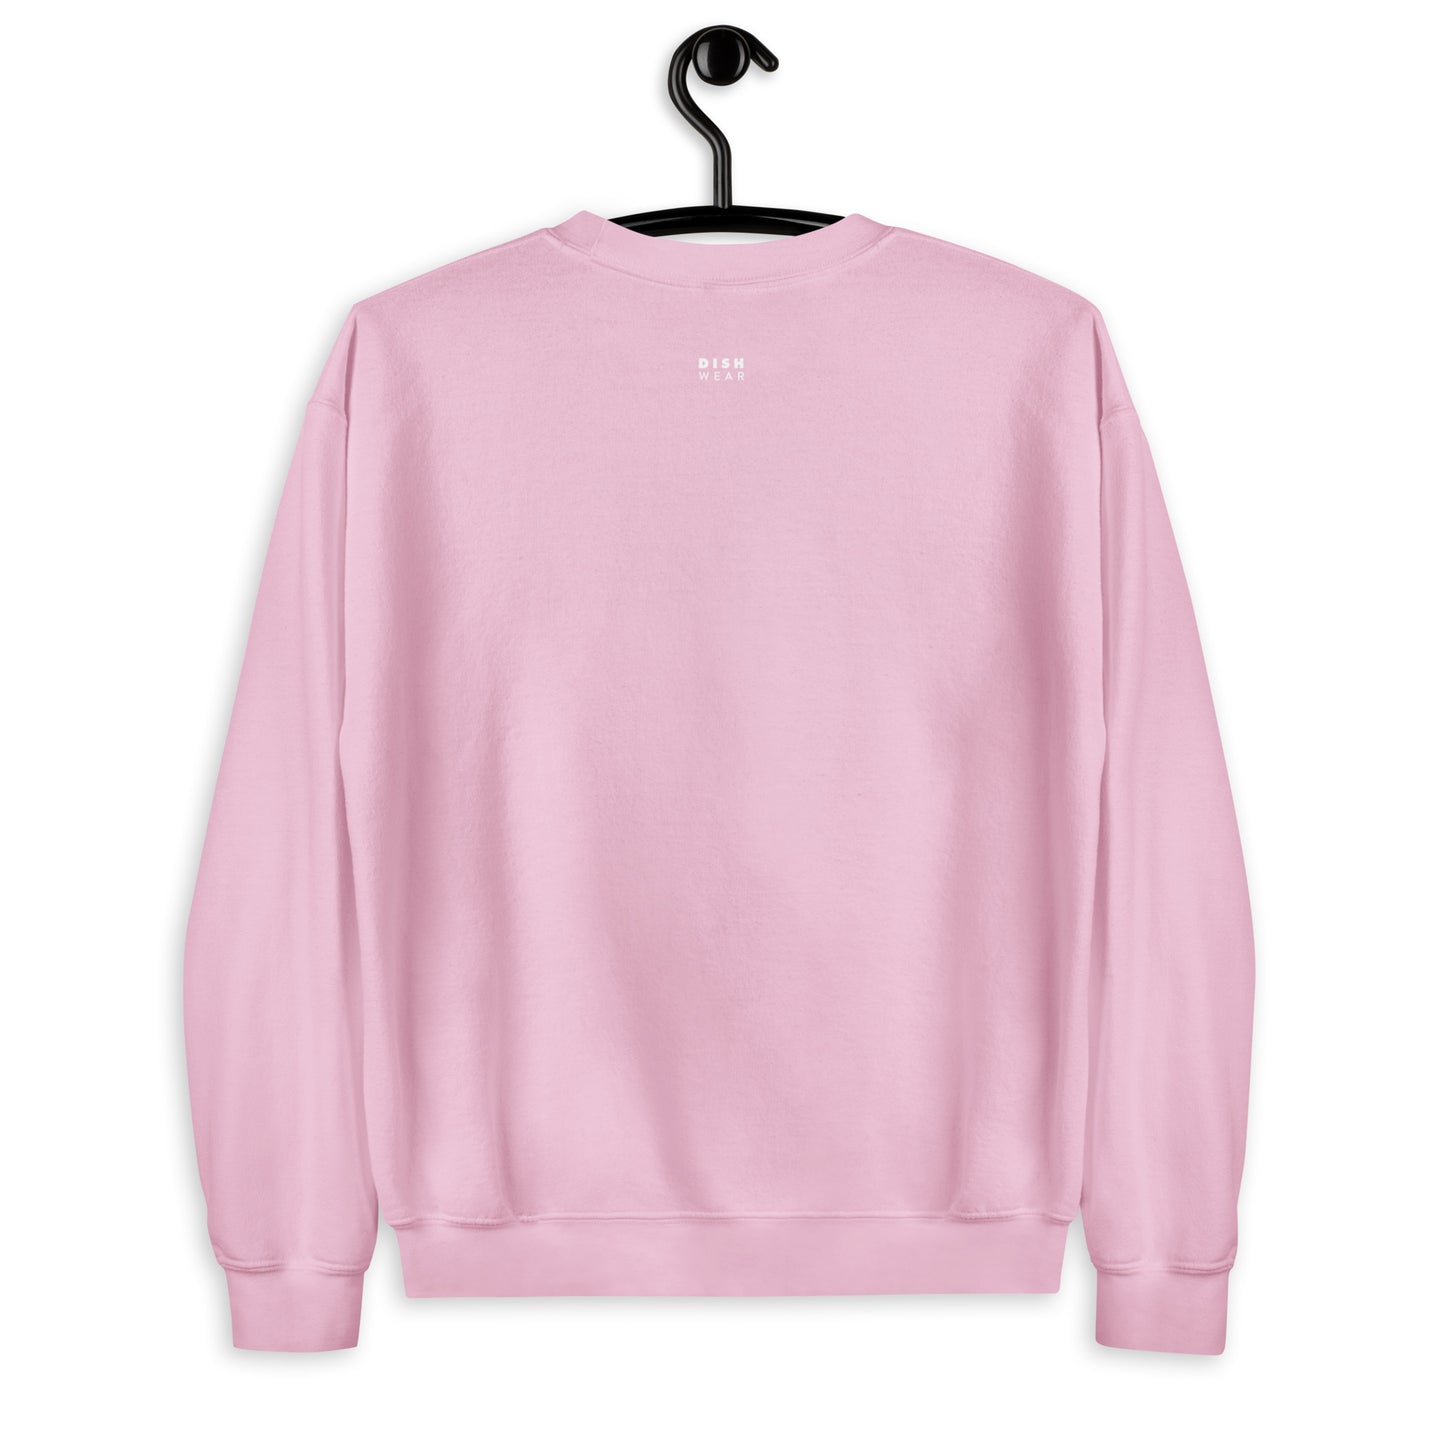 Dill Sweatshirt - Arched Font